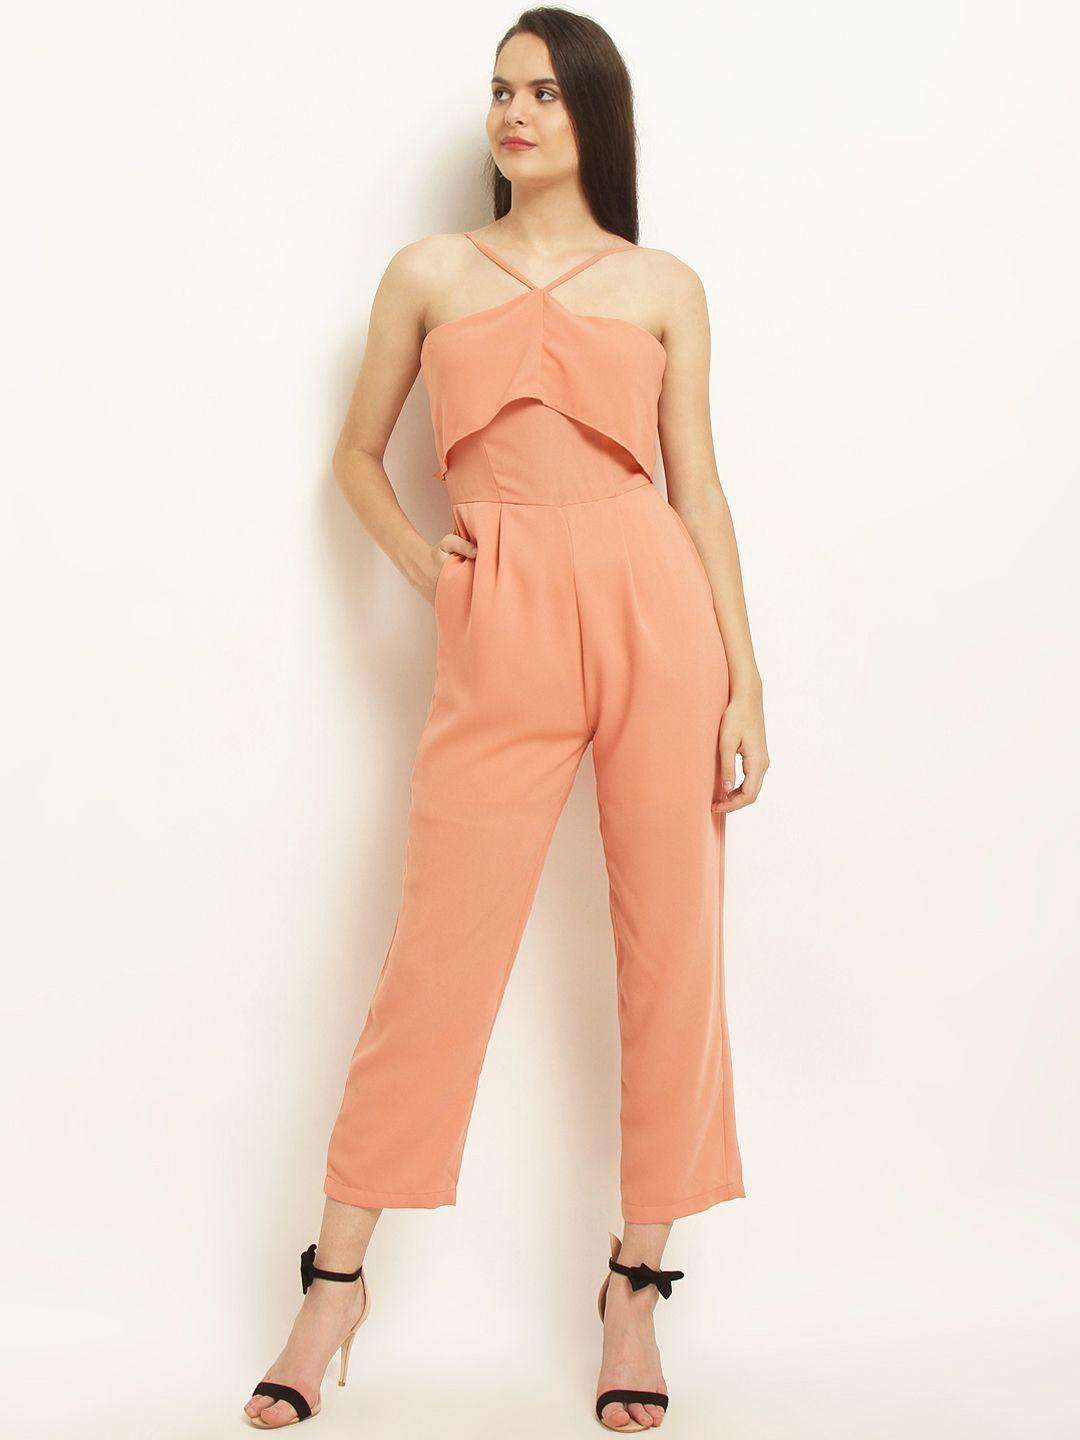 marie claire peach-coloured solid basic jumpsuit